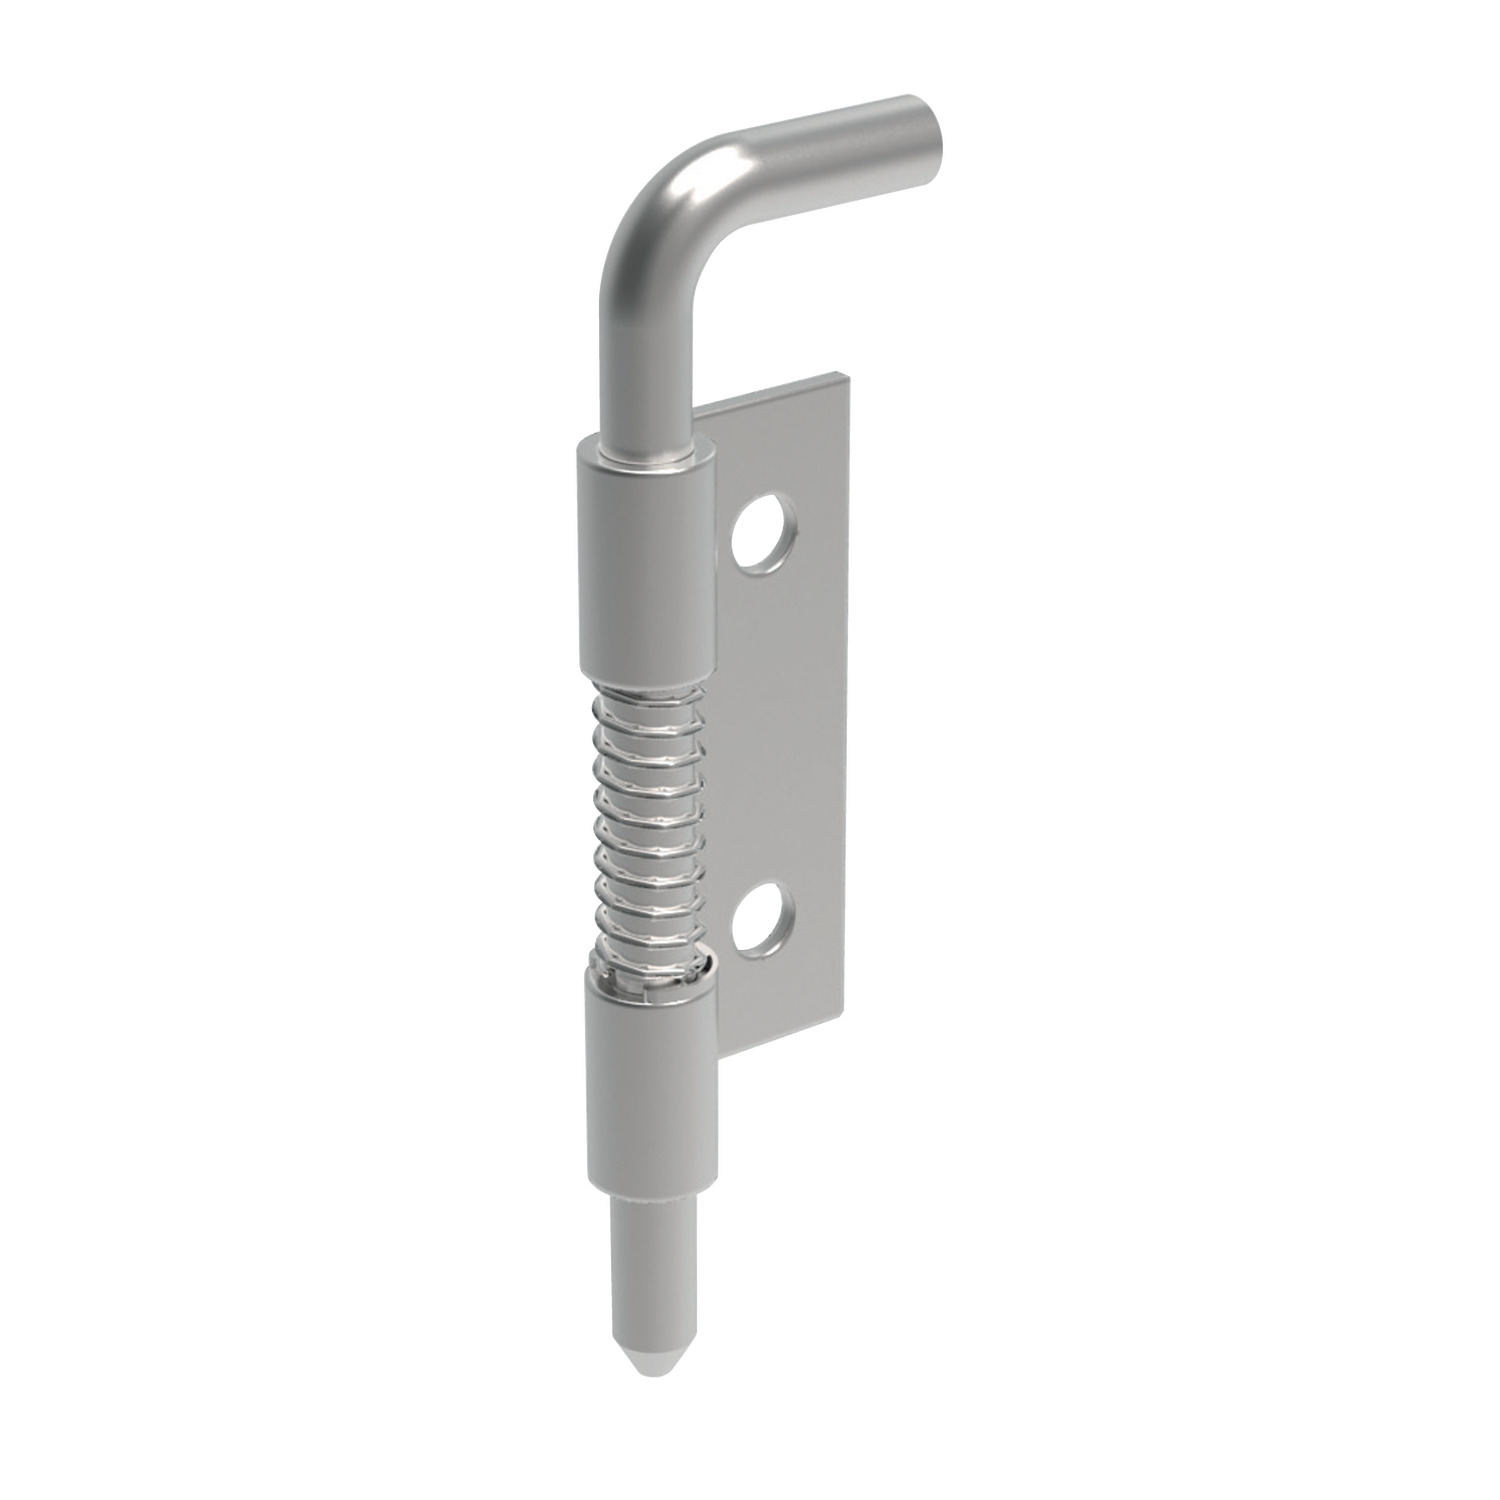 End Mount Concealed Pivot Hinge Spring-loaded Concealed Pivot Hinges. Screw or weld-on available. Opening angle of 110°